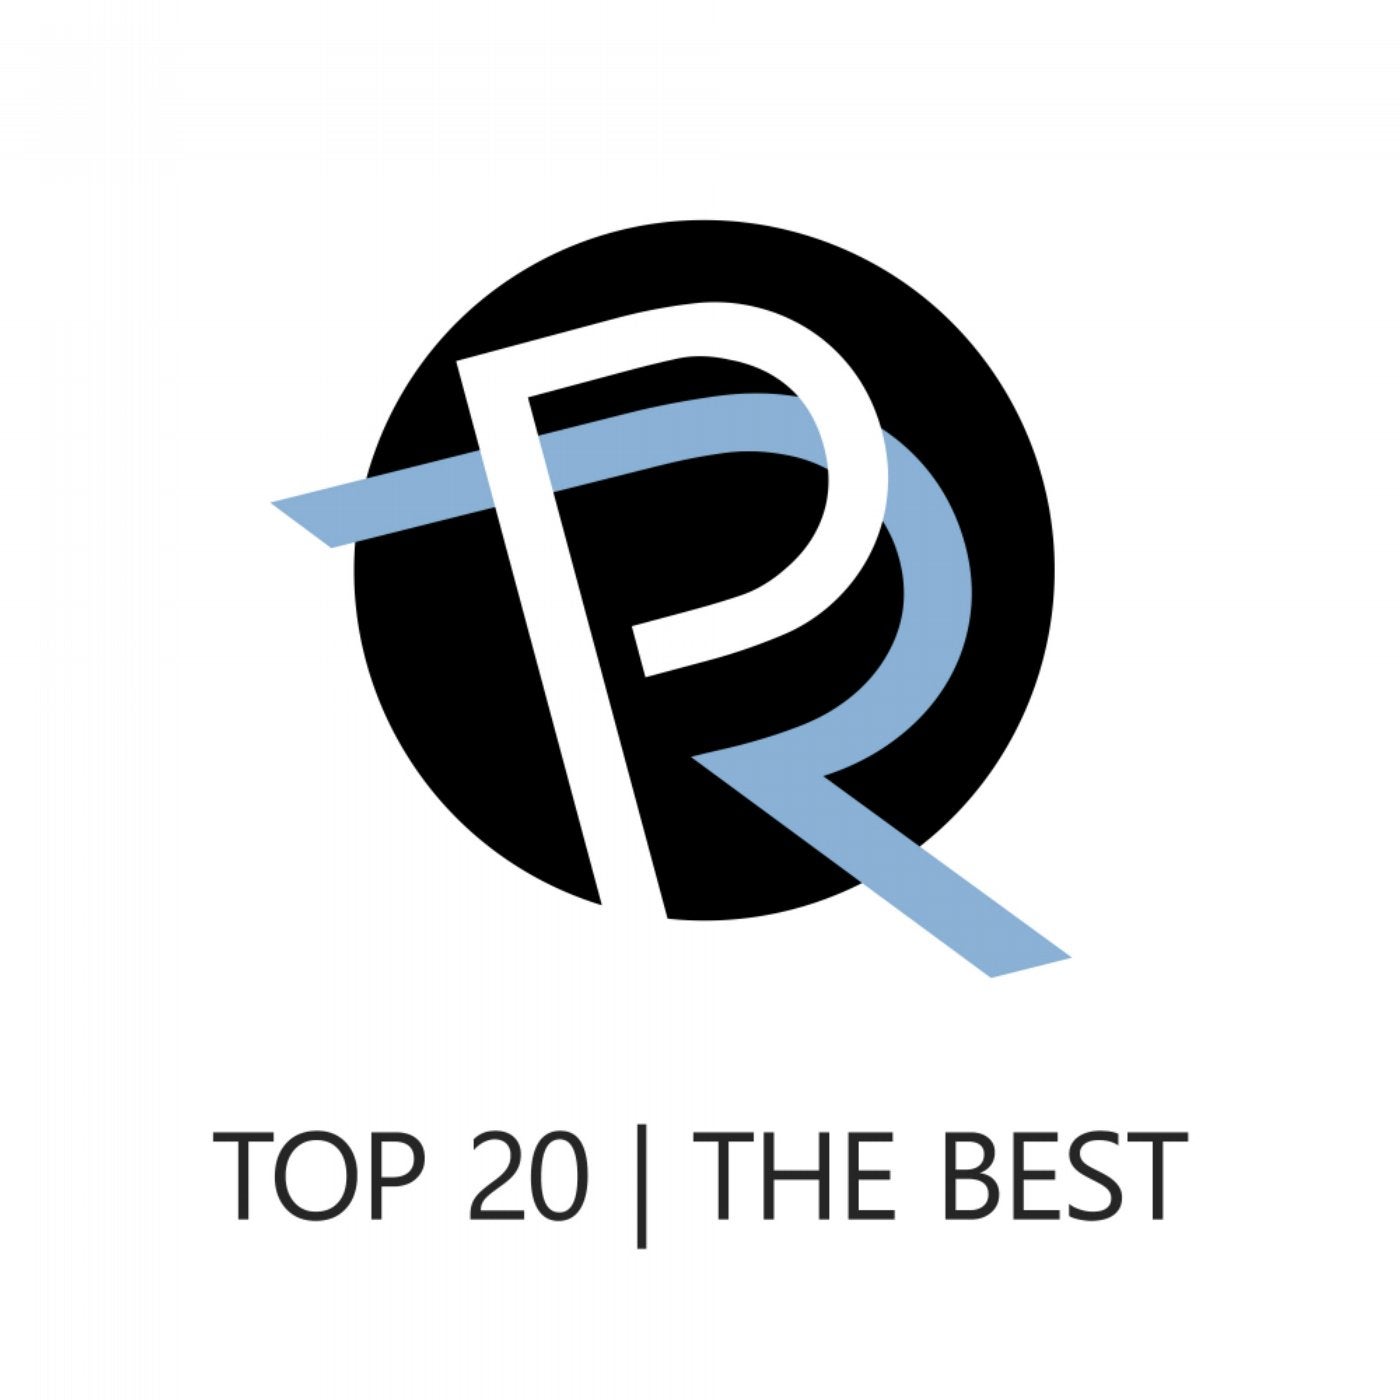 TOP 20 | THE BEST